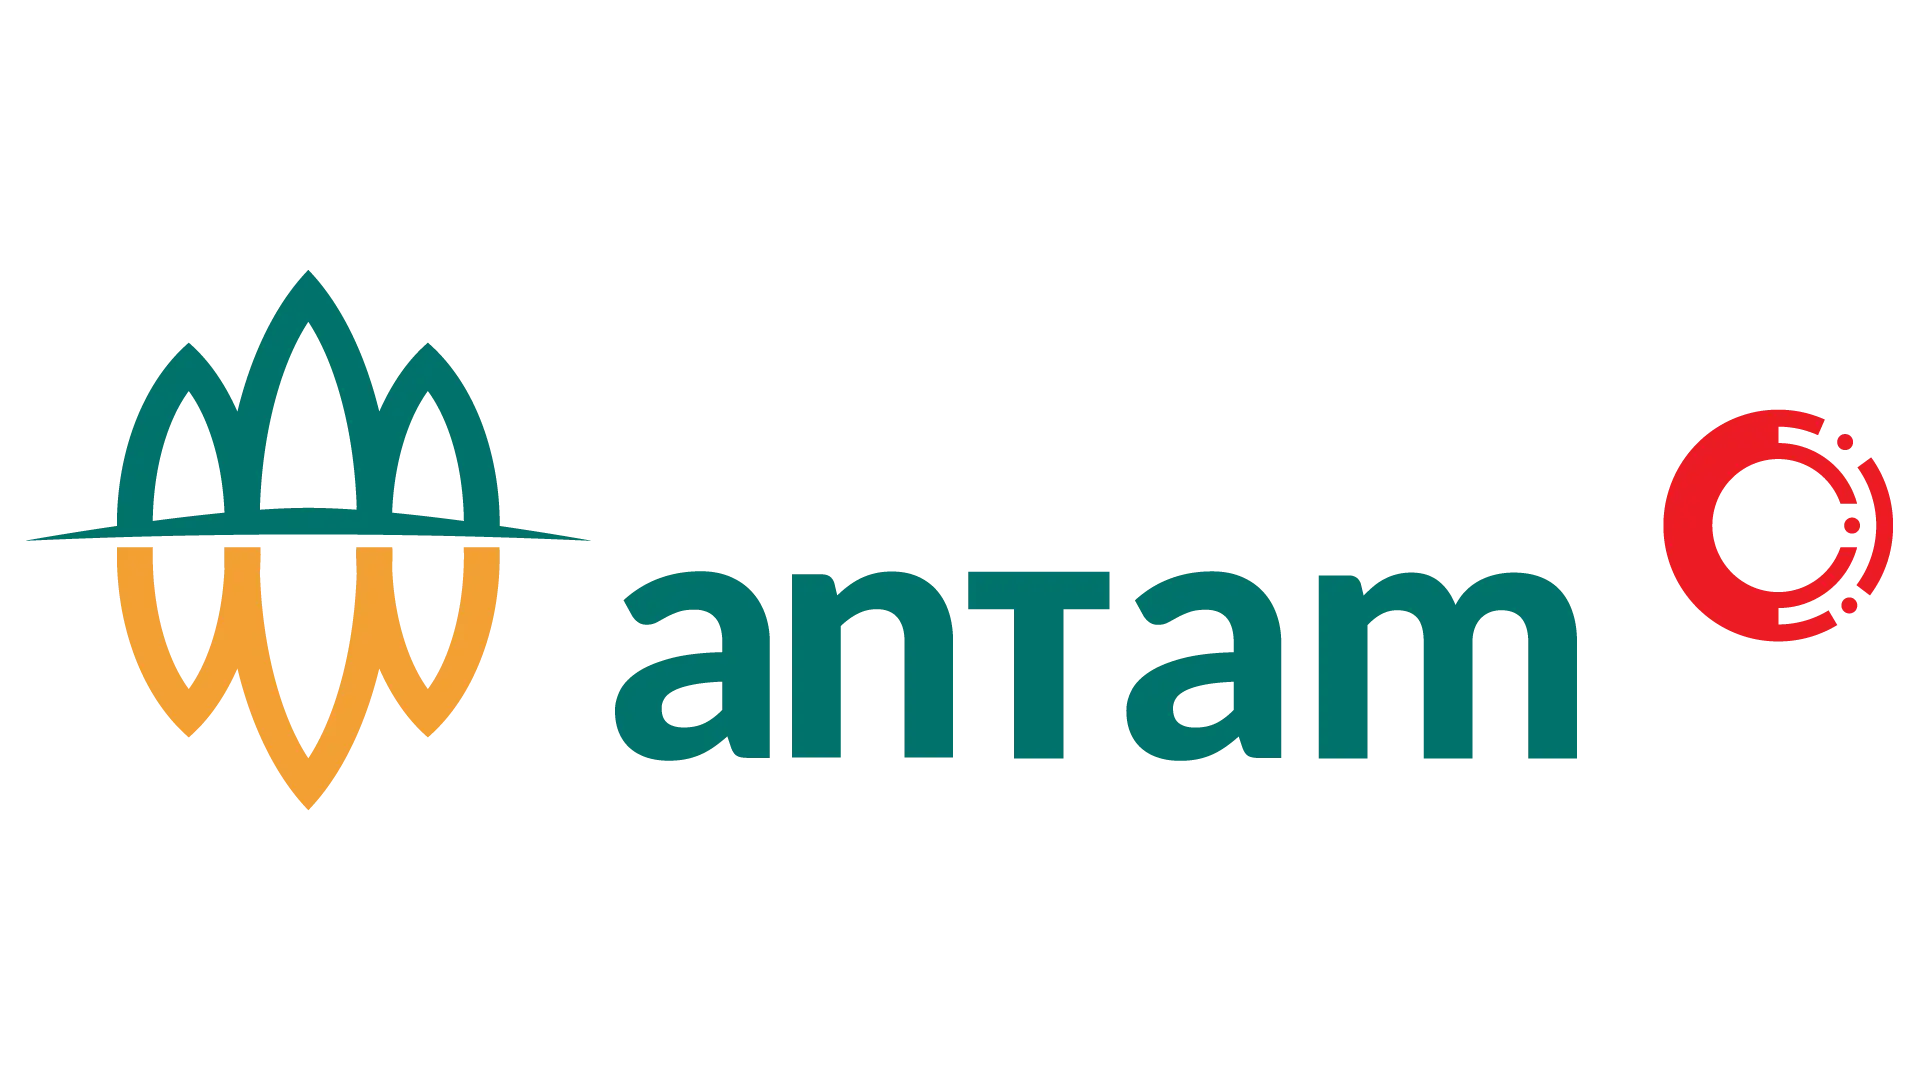 Chatbot in the mining industry owned by Antam company